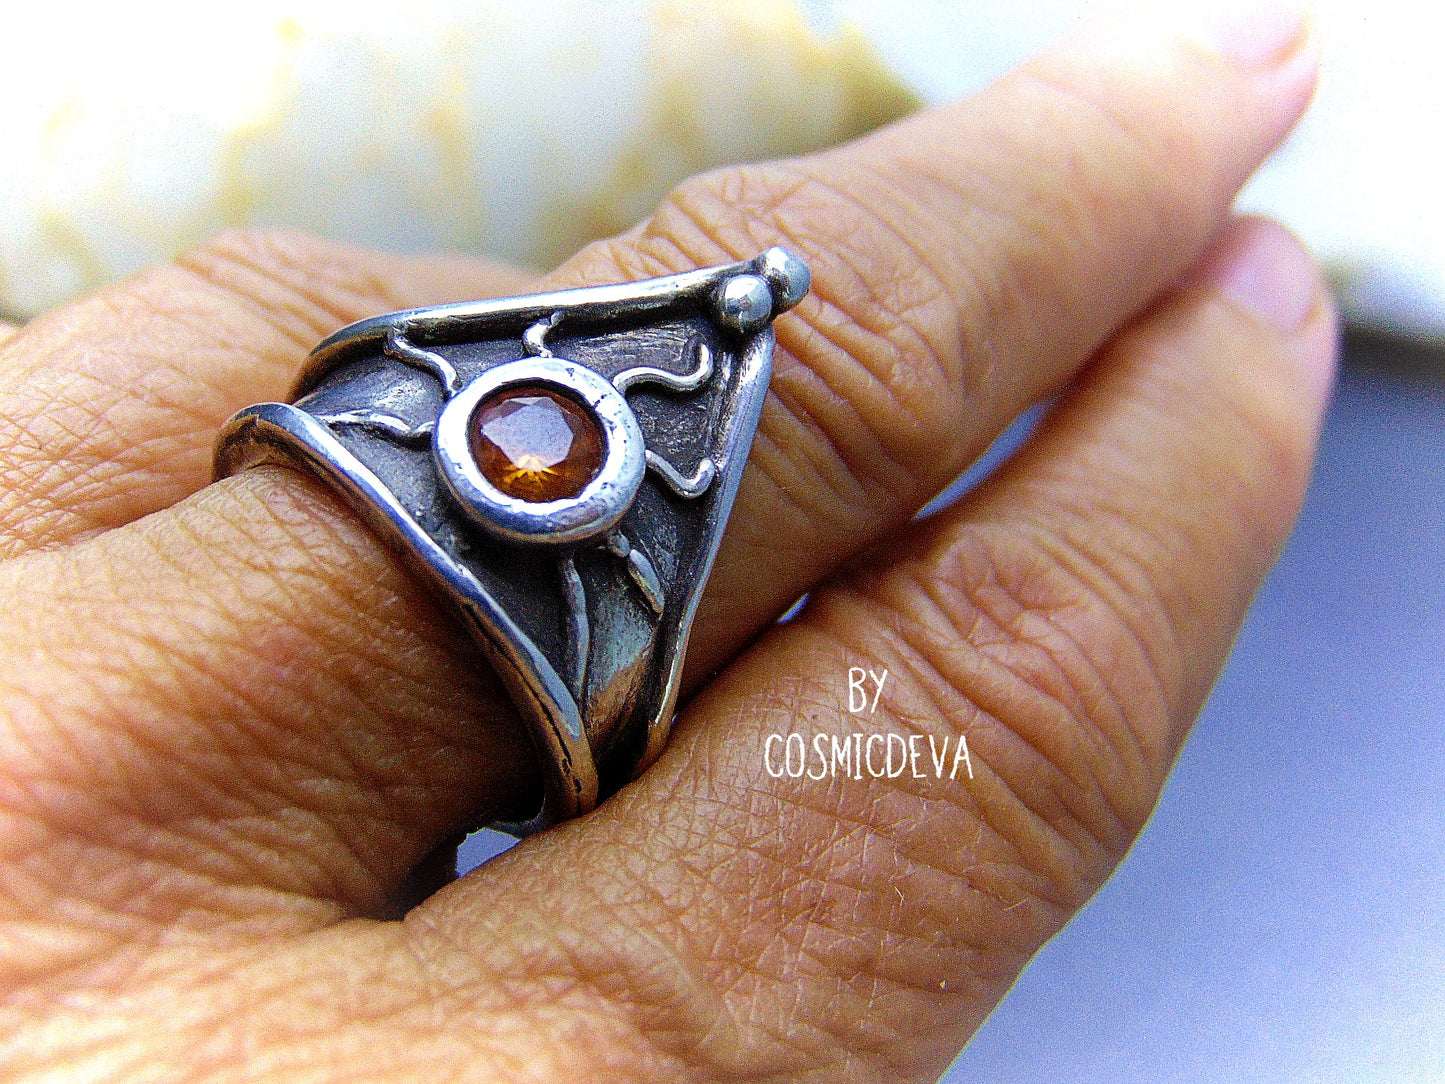 Be the knight in shining armor with this beautiful sterling silver ring! Handcrafted with a medieval triangle shield design, this classic piece is set with a 5mm round citrine stone and oxidized for a vintage antique look. The decorative hand sculptured triangle shield makes the perfect centerpiece, adding an antique charm to your everyday look.- CosmicDeva